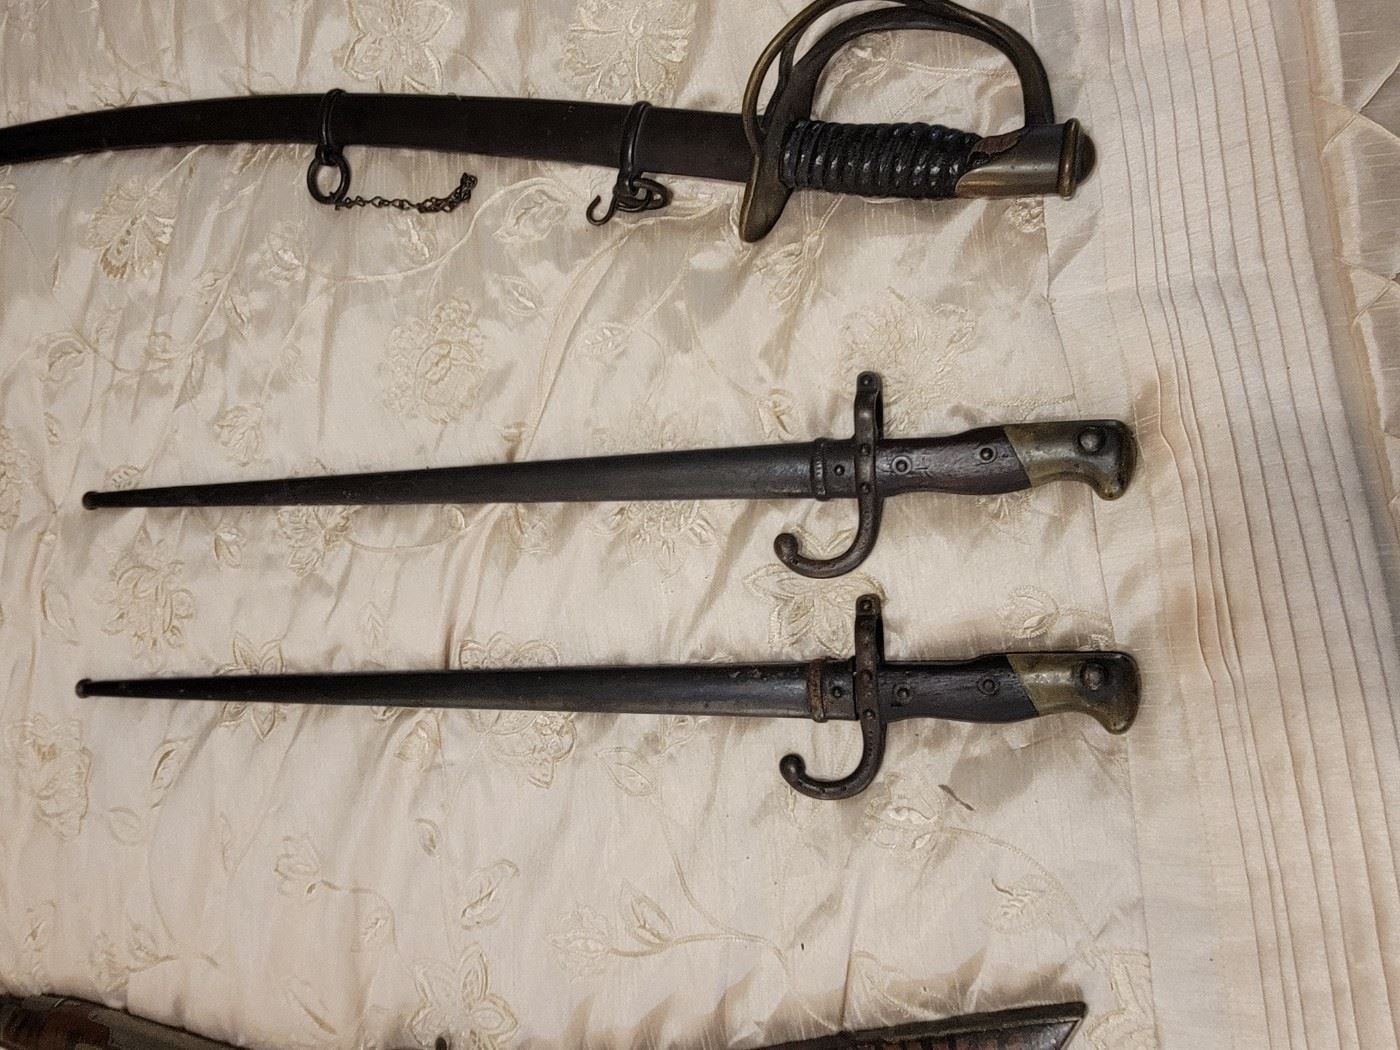 Antique 1862 Civil War Calvary sword 
Antique 1878 French Bayonets
The swords, bayonets and antique guns are not in the house until the sale.